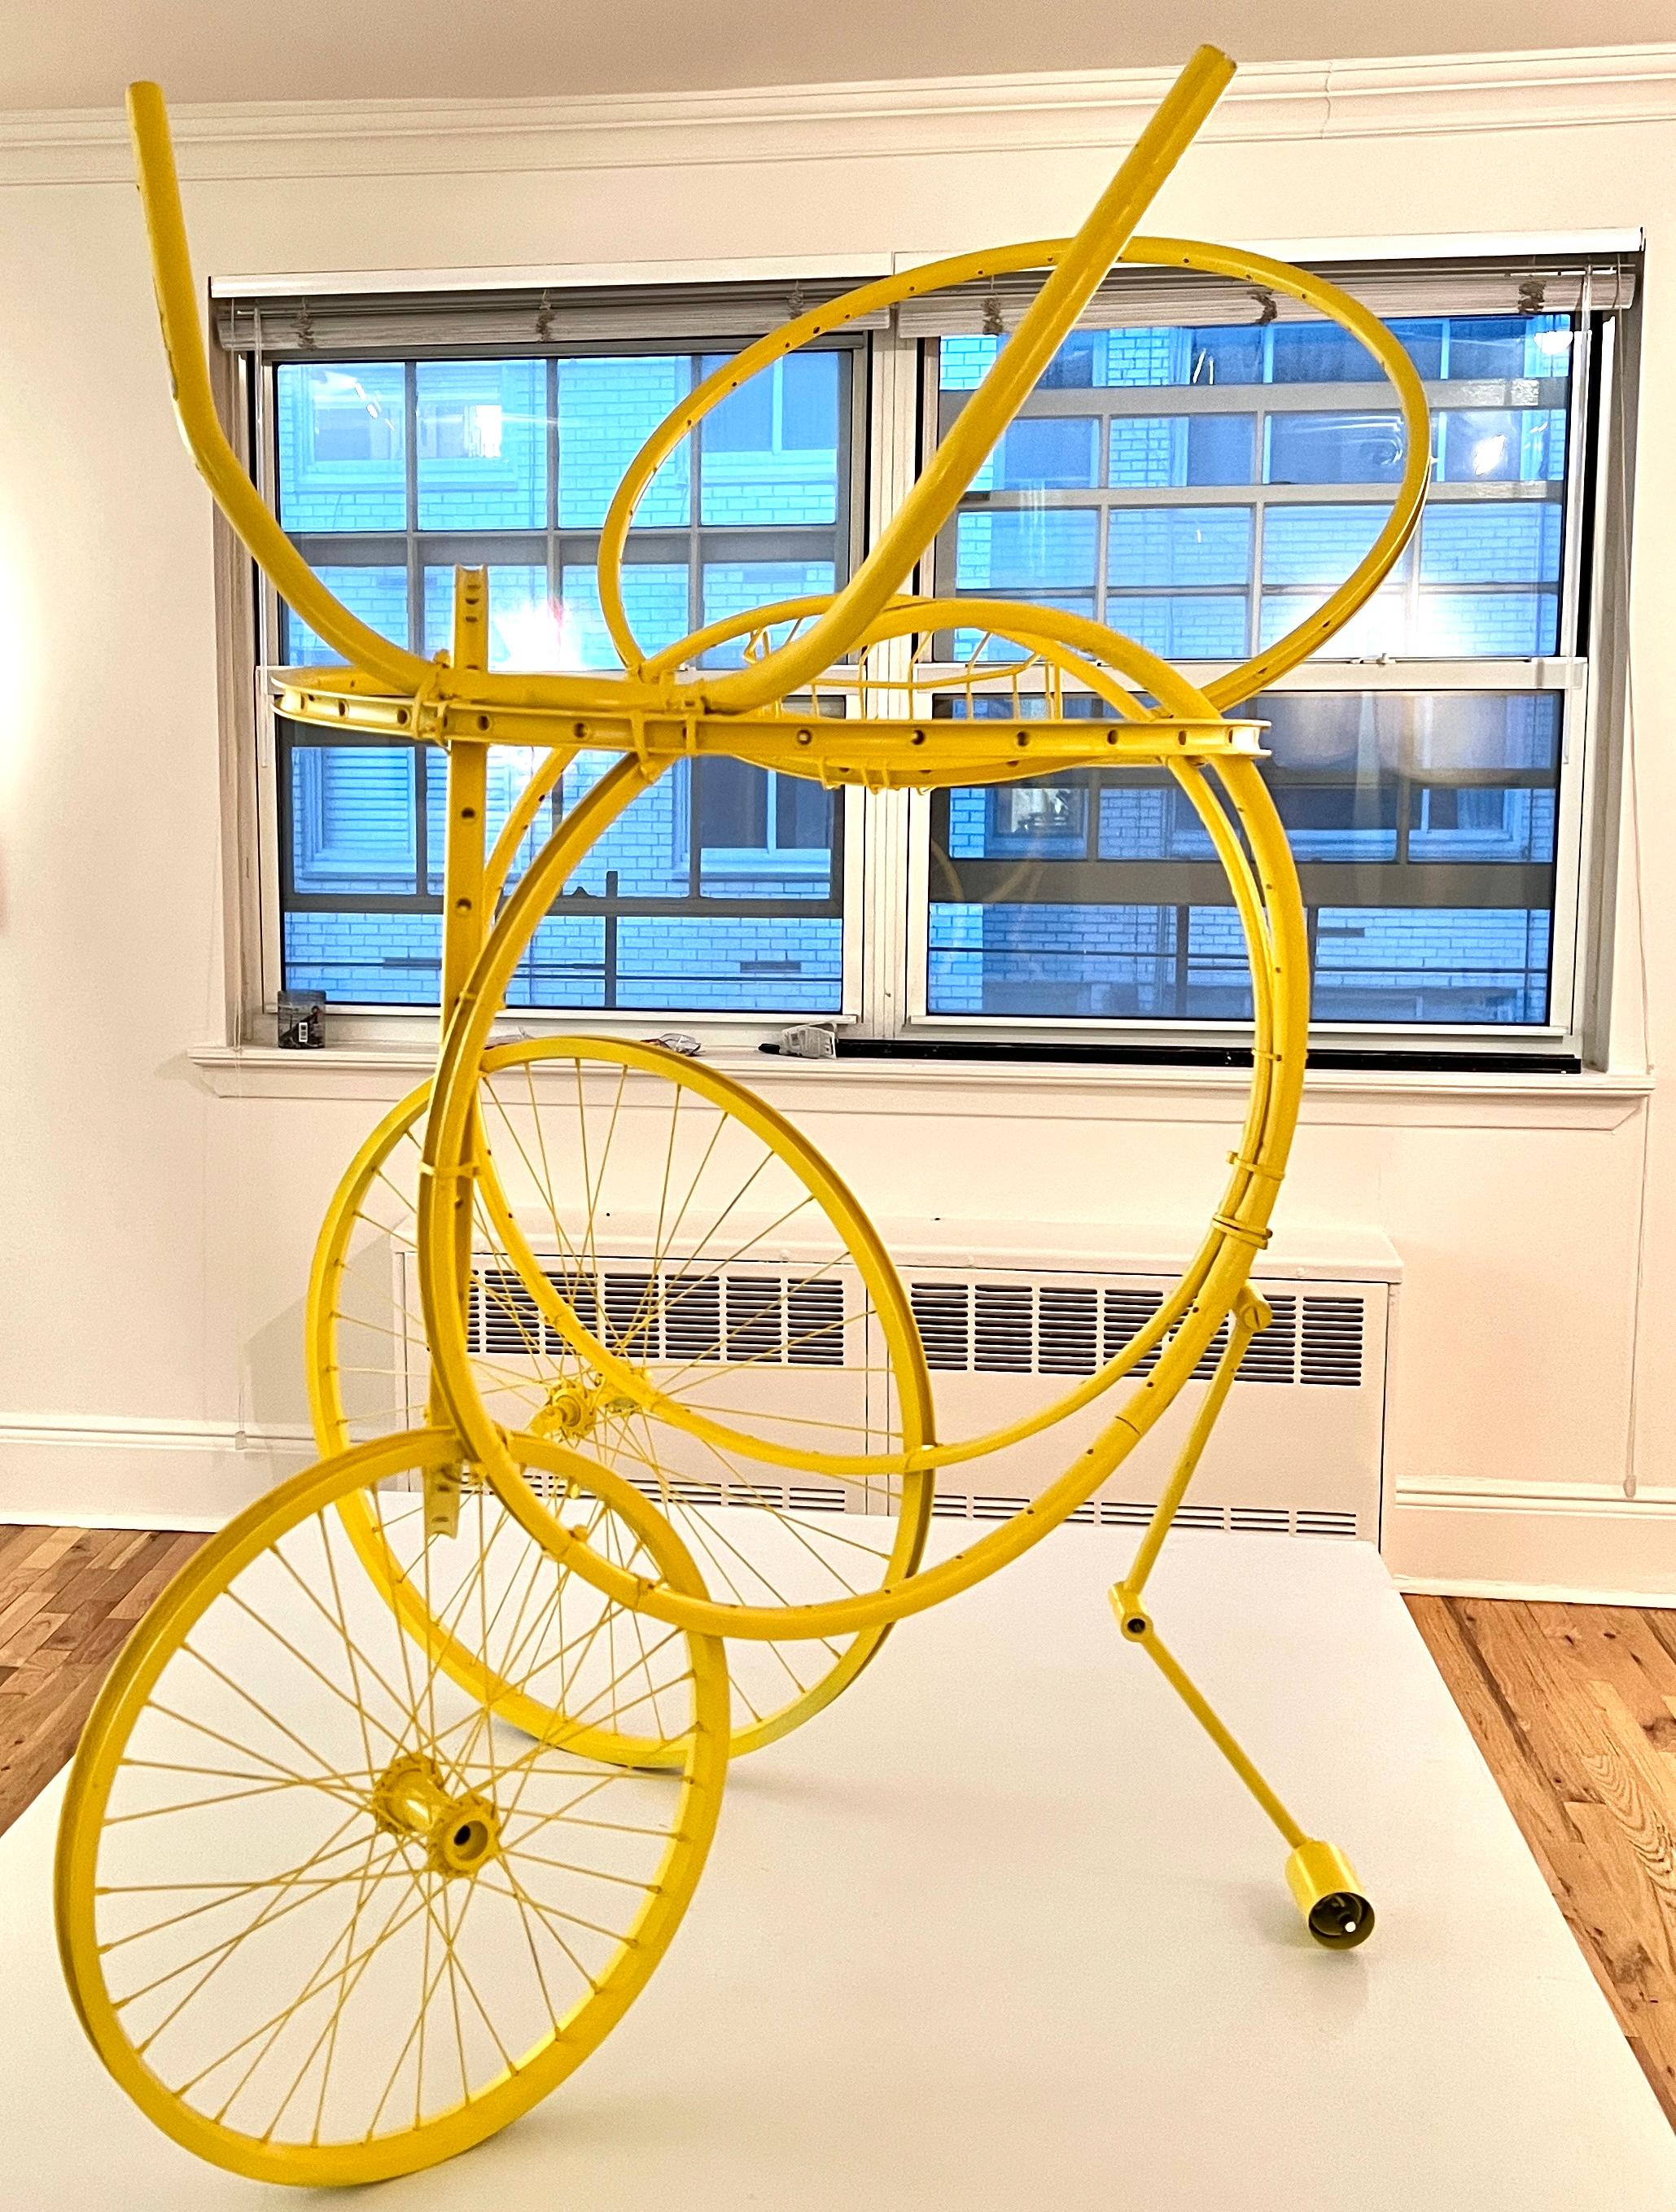 Michael Manning Abstract Sculpture - Golden Taurus: Contemporary Sculpture Bicycle Enamel